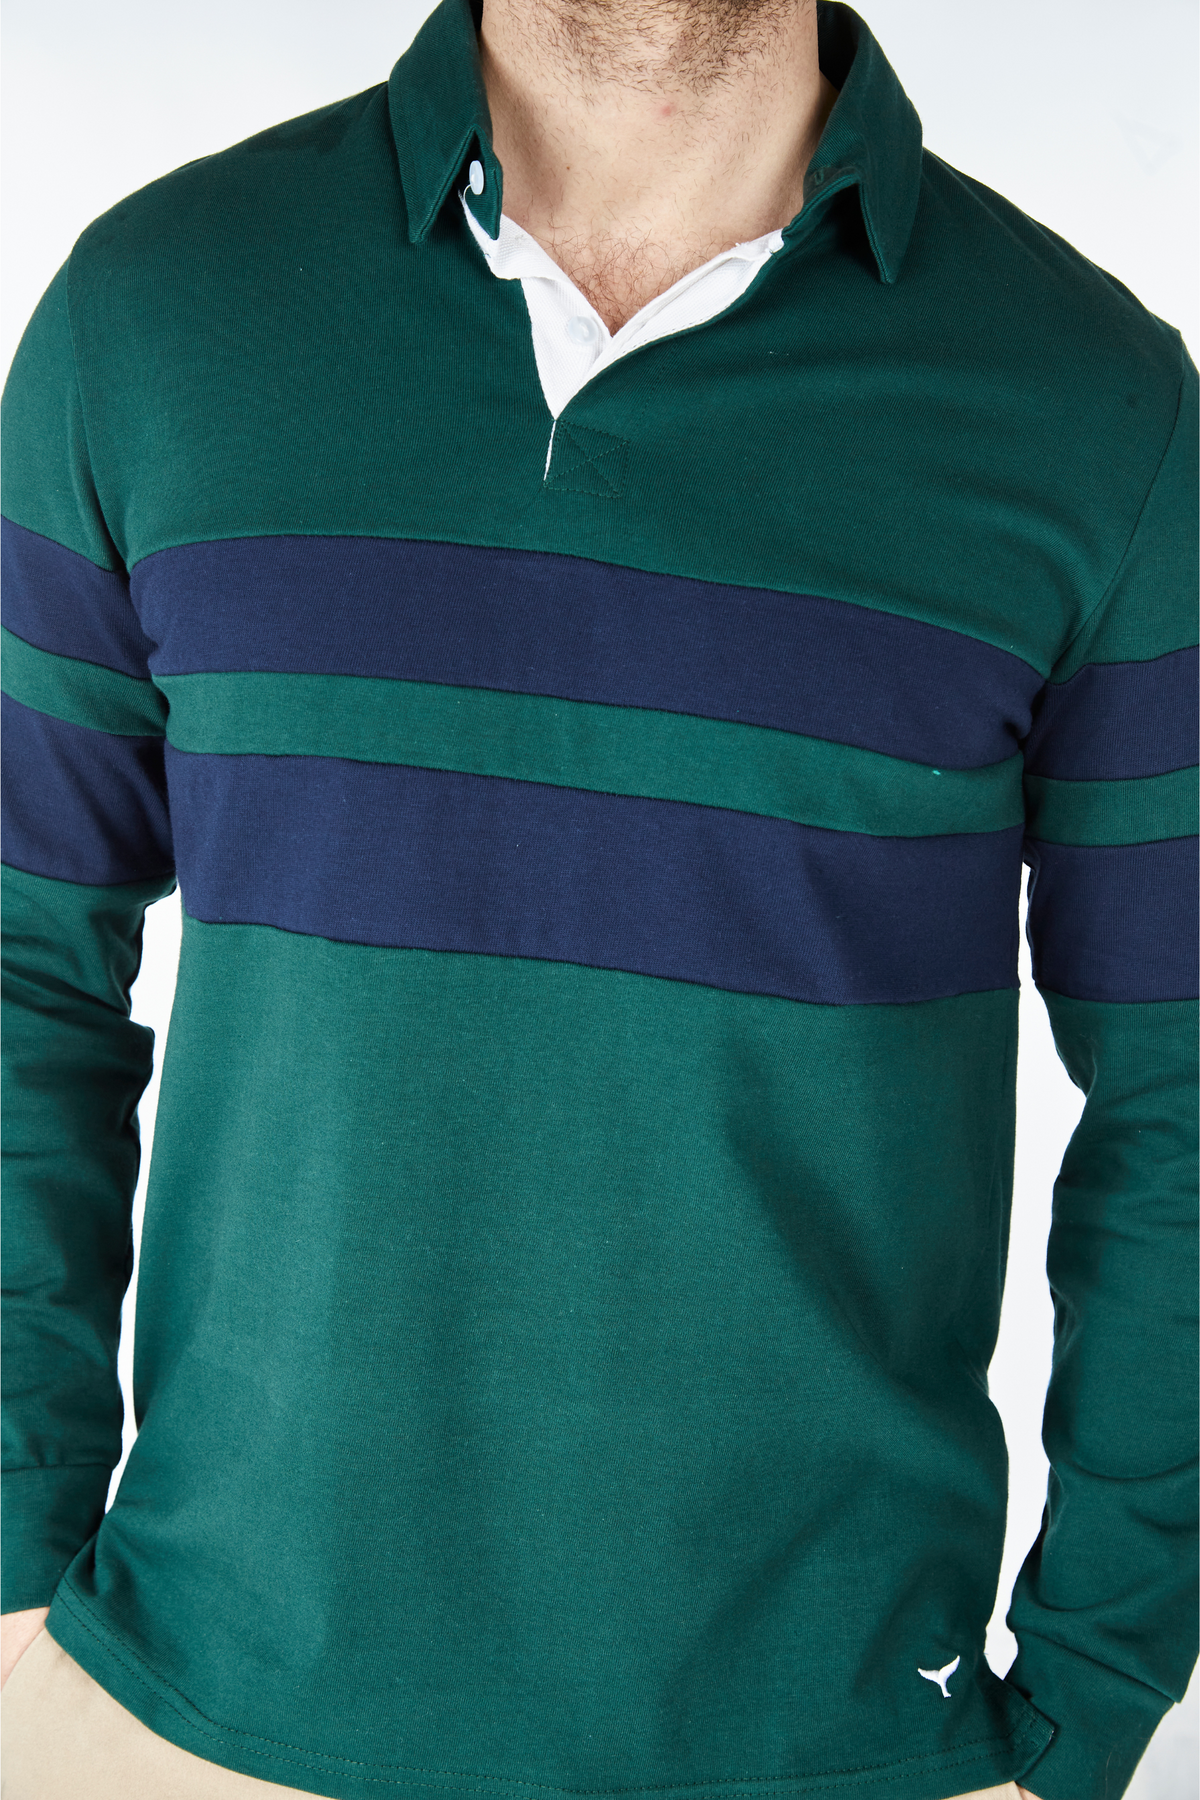 Holme Rugby Shirt - Green - Whale Of A Time Clothing